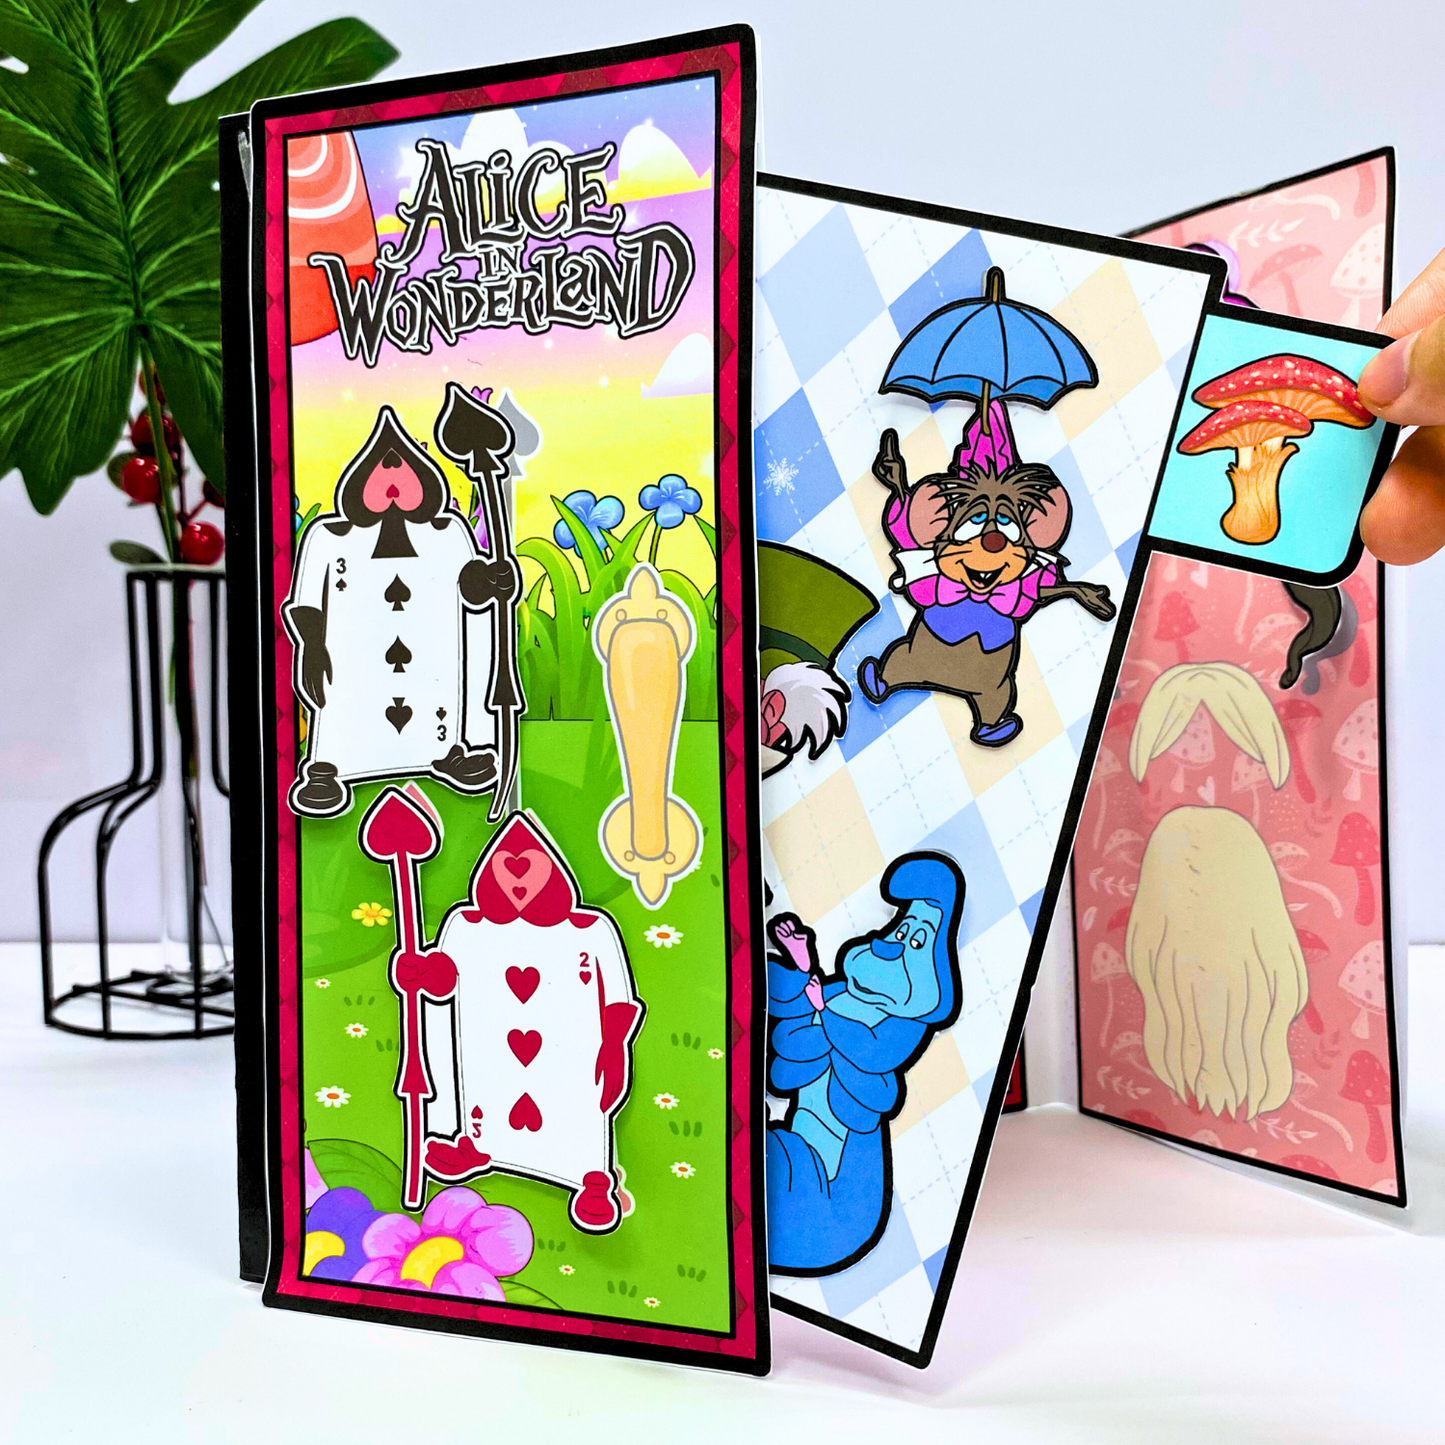 USA, Free Shipping, ALICE WARDROBE Printables, Paper Crafts for Kids, DIY Unique Holiday Gift for kids